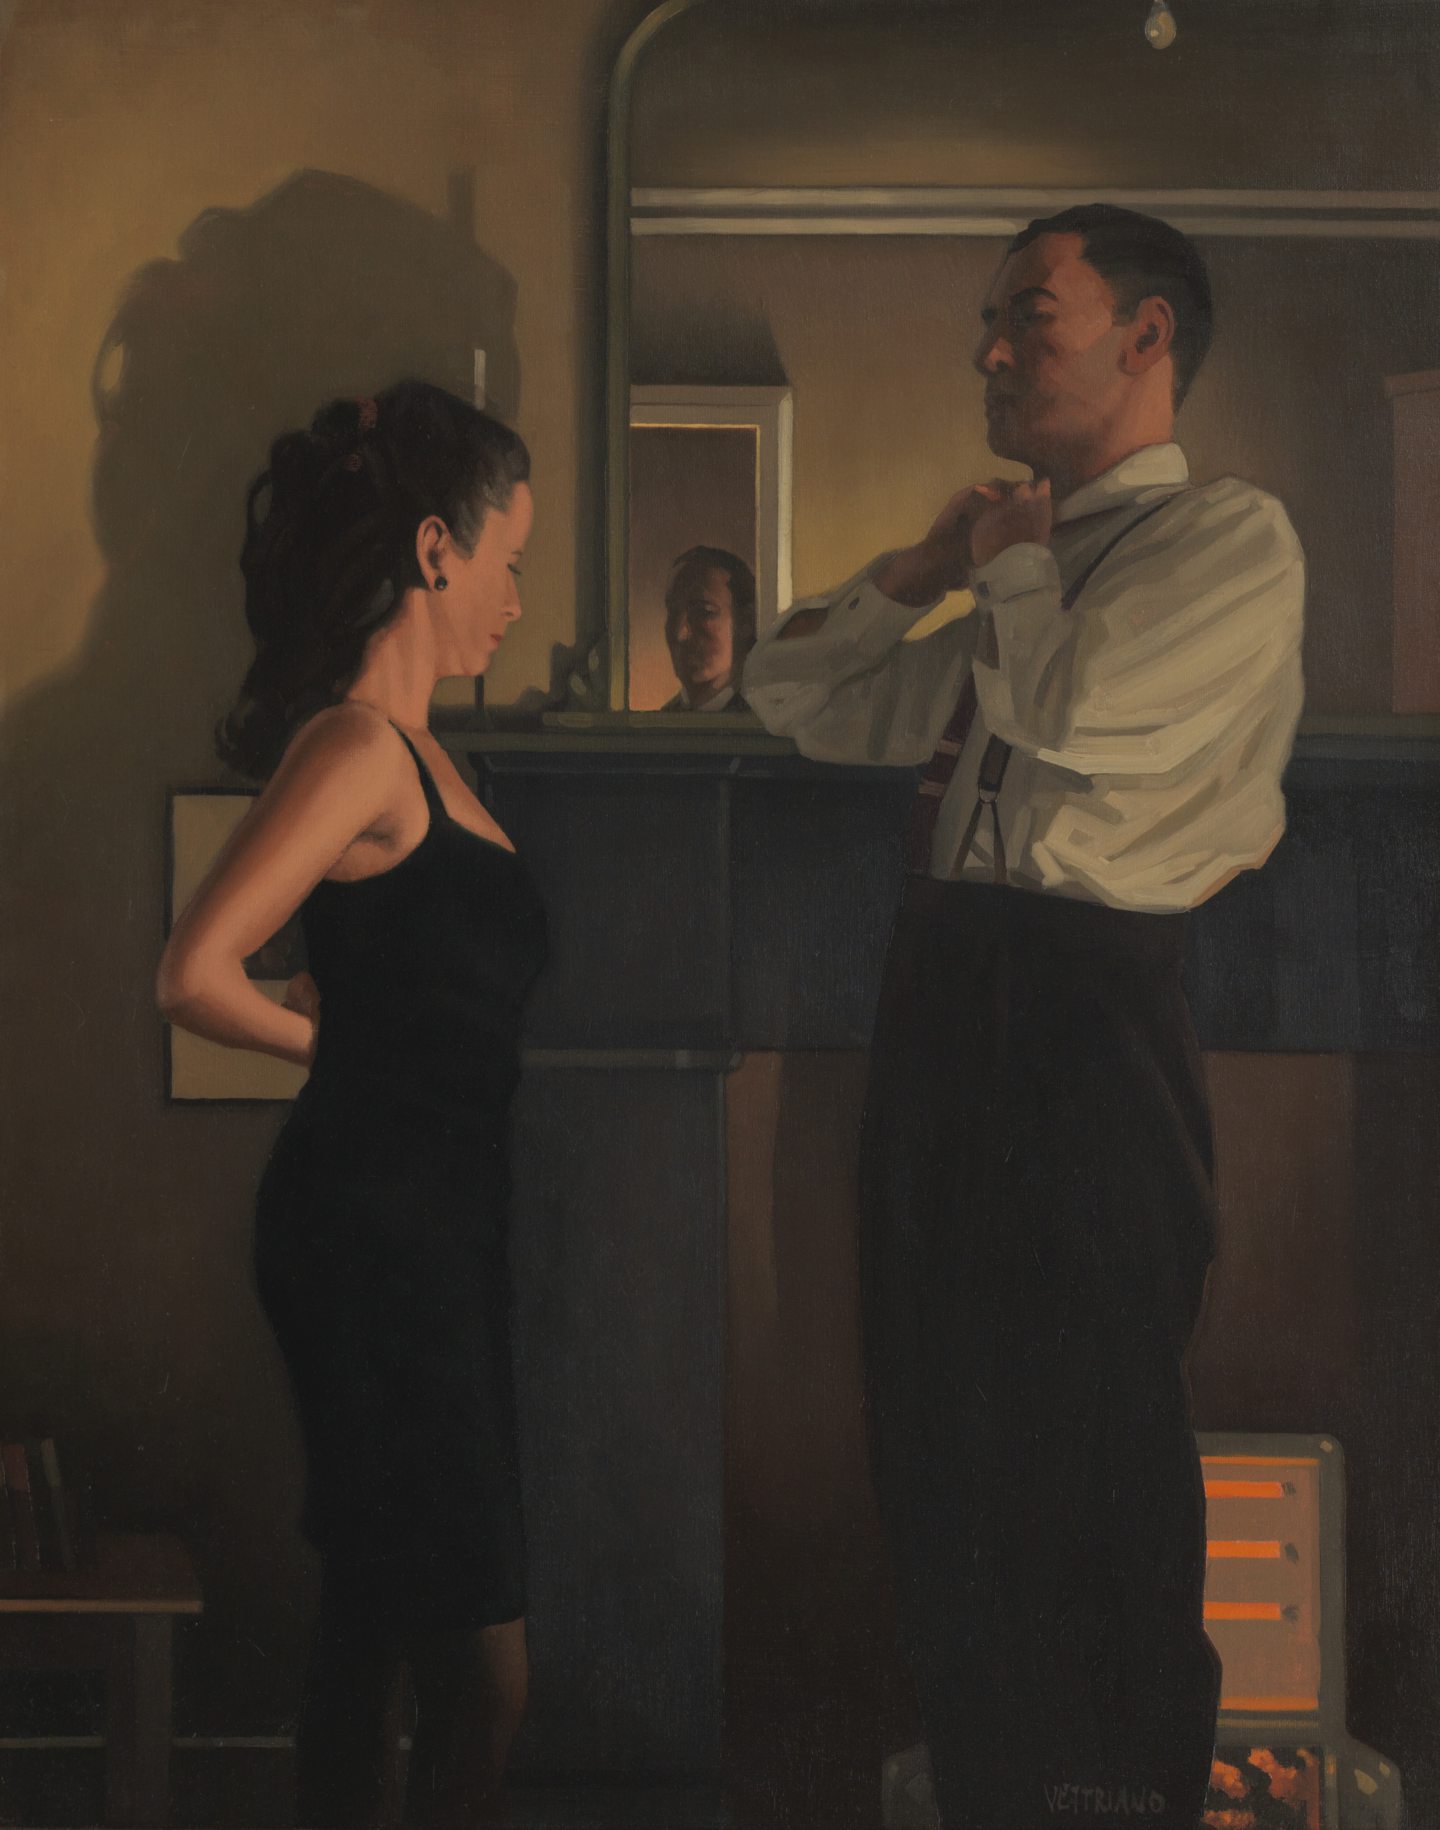 Between Darkness and Dawn by Jack Vettriano. Supplied by Bonhams.